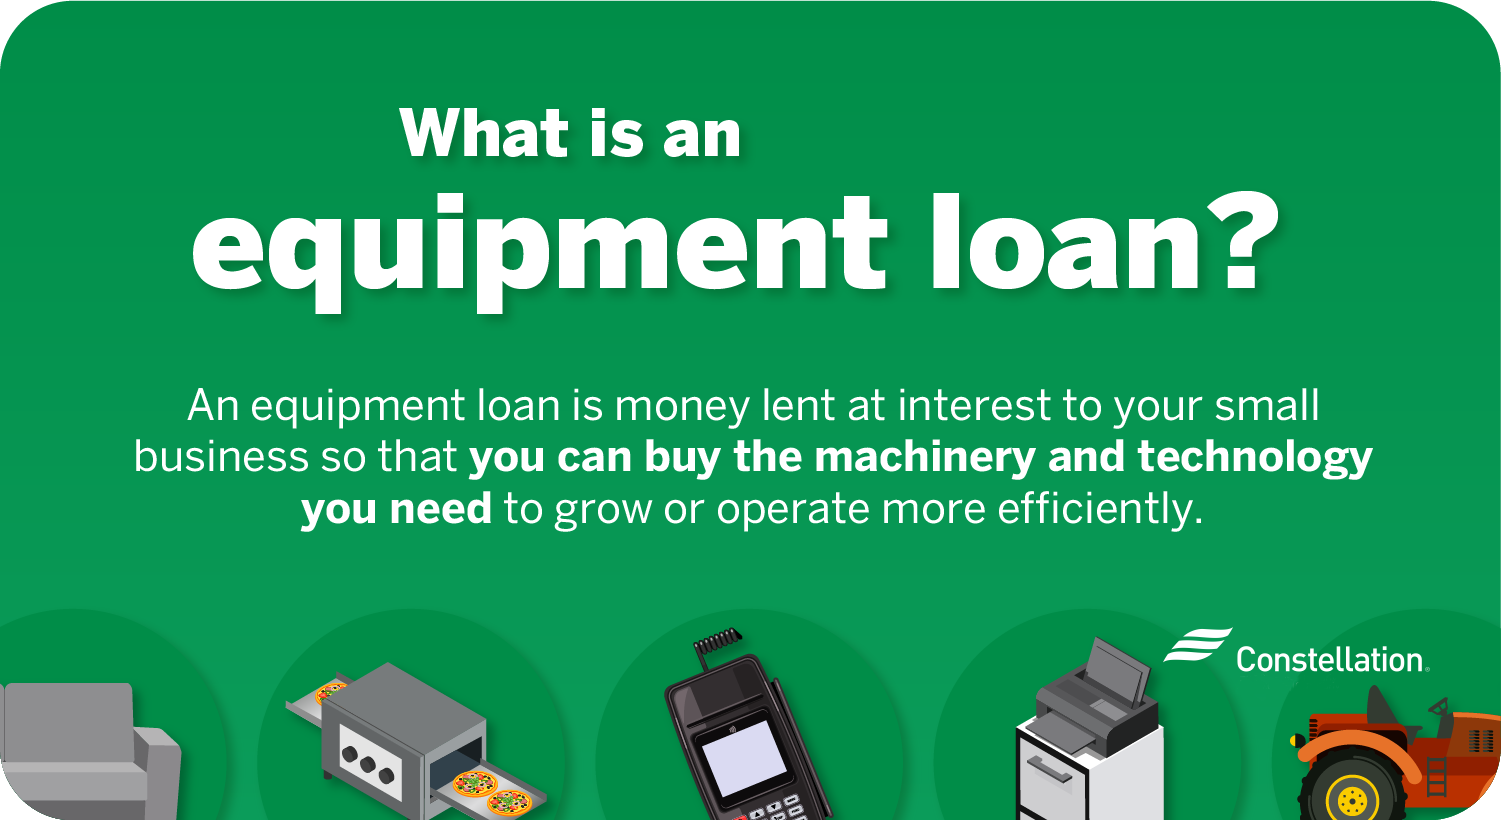 What is a small-business equipment loan?